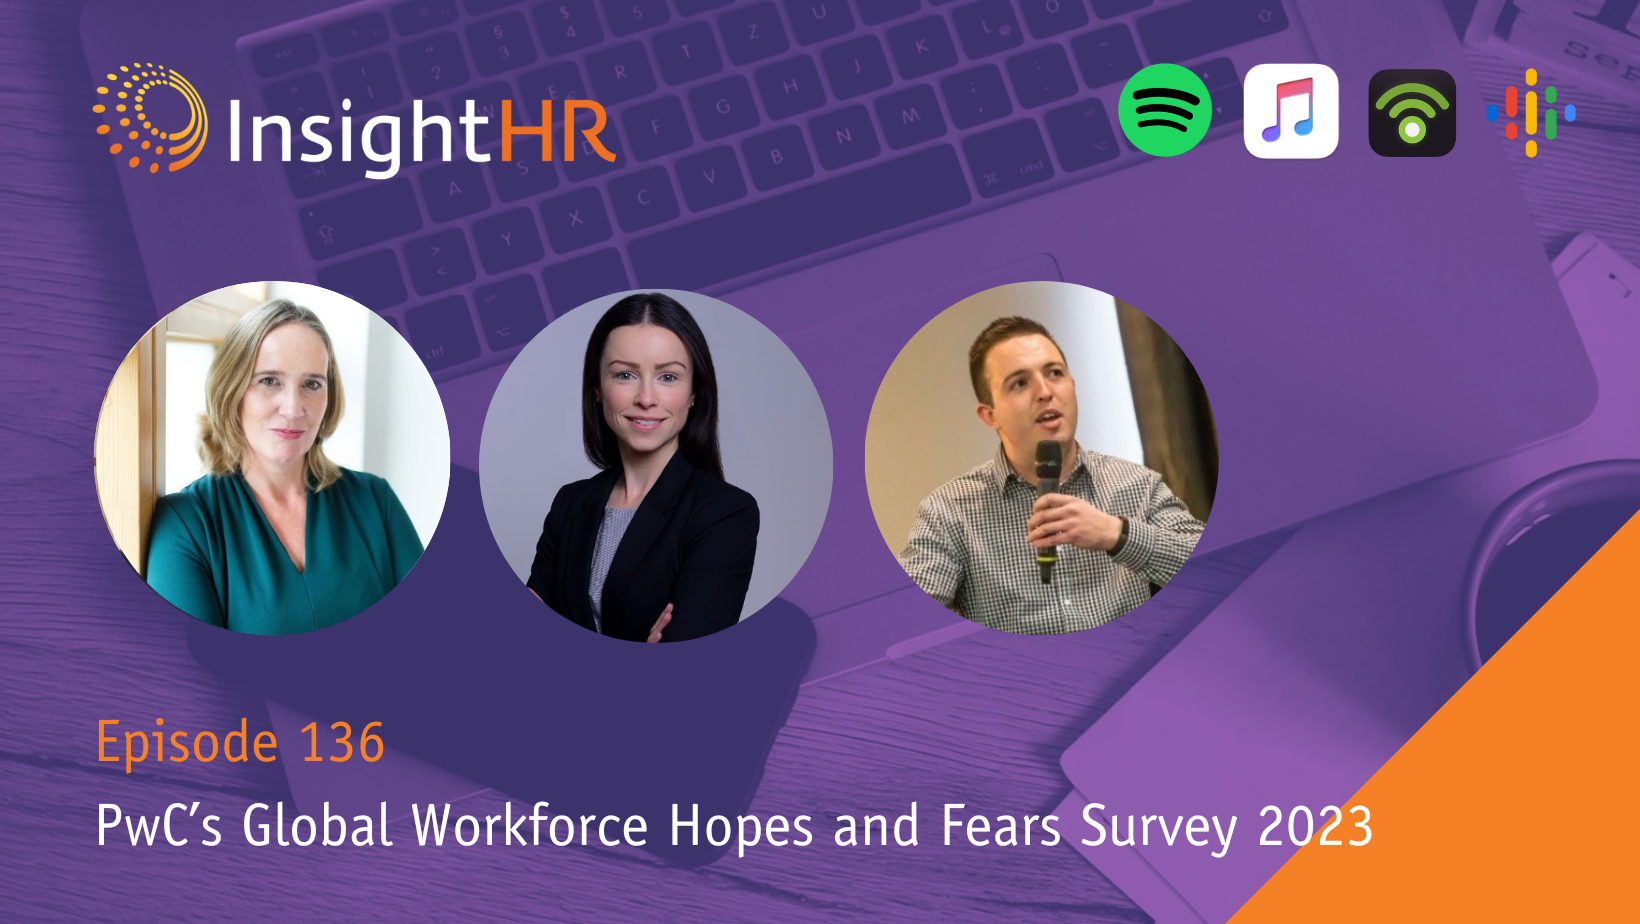 Episode 136 HR Room Podcast PwC’s Global Workforce Hopes and Fears Survey 2023